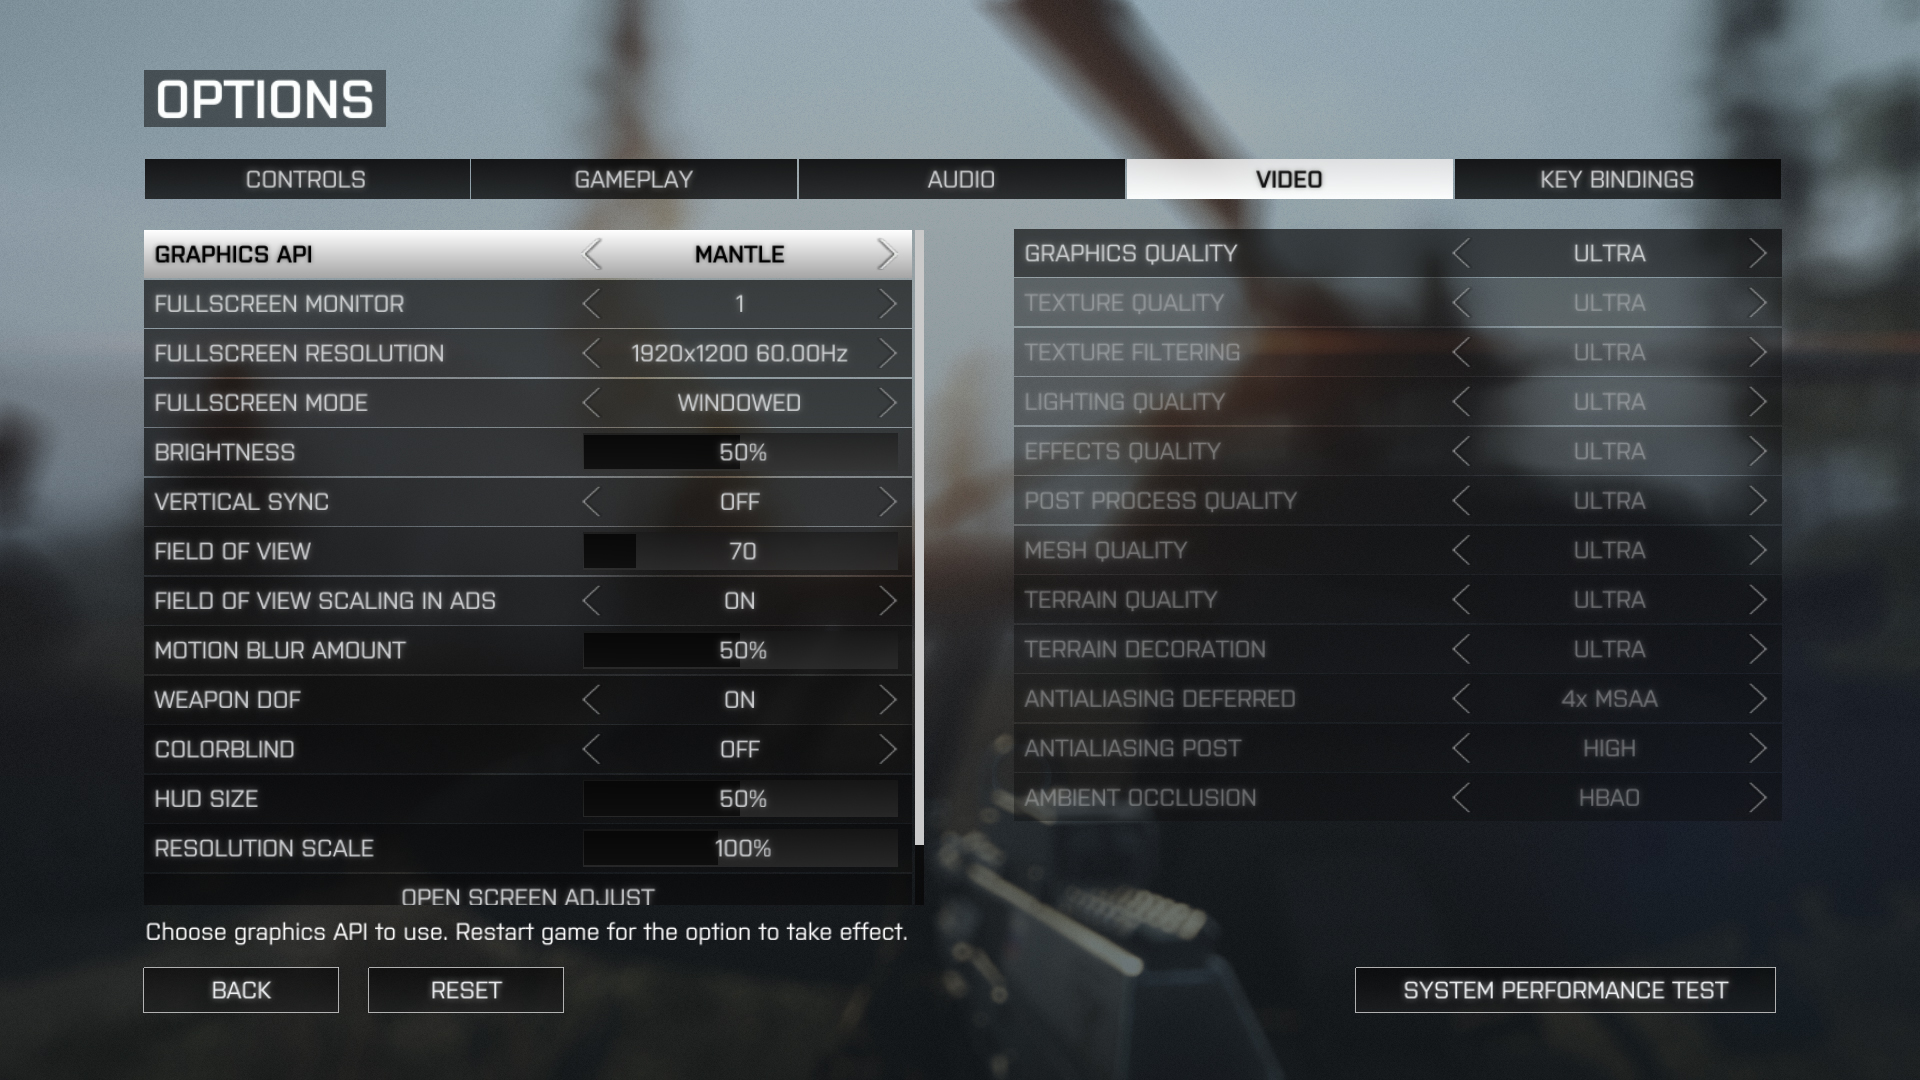 Battlefield 4's Battlelog lets players use browsers as second